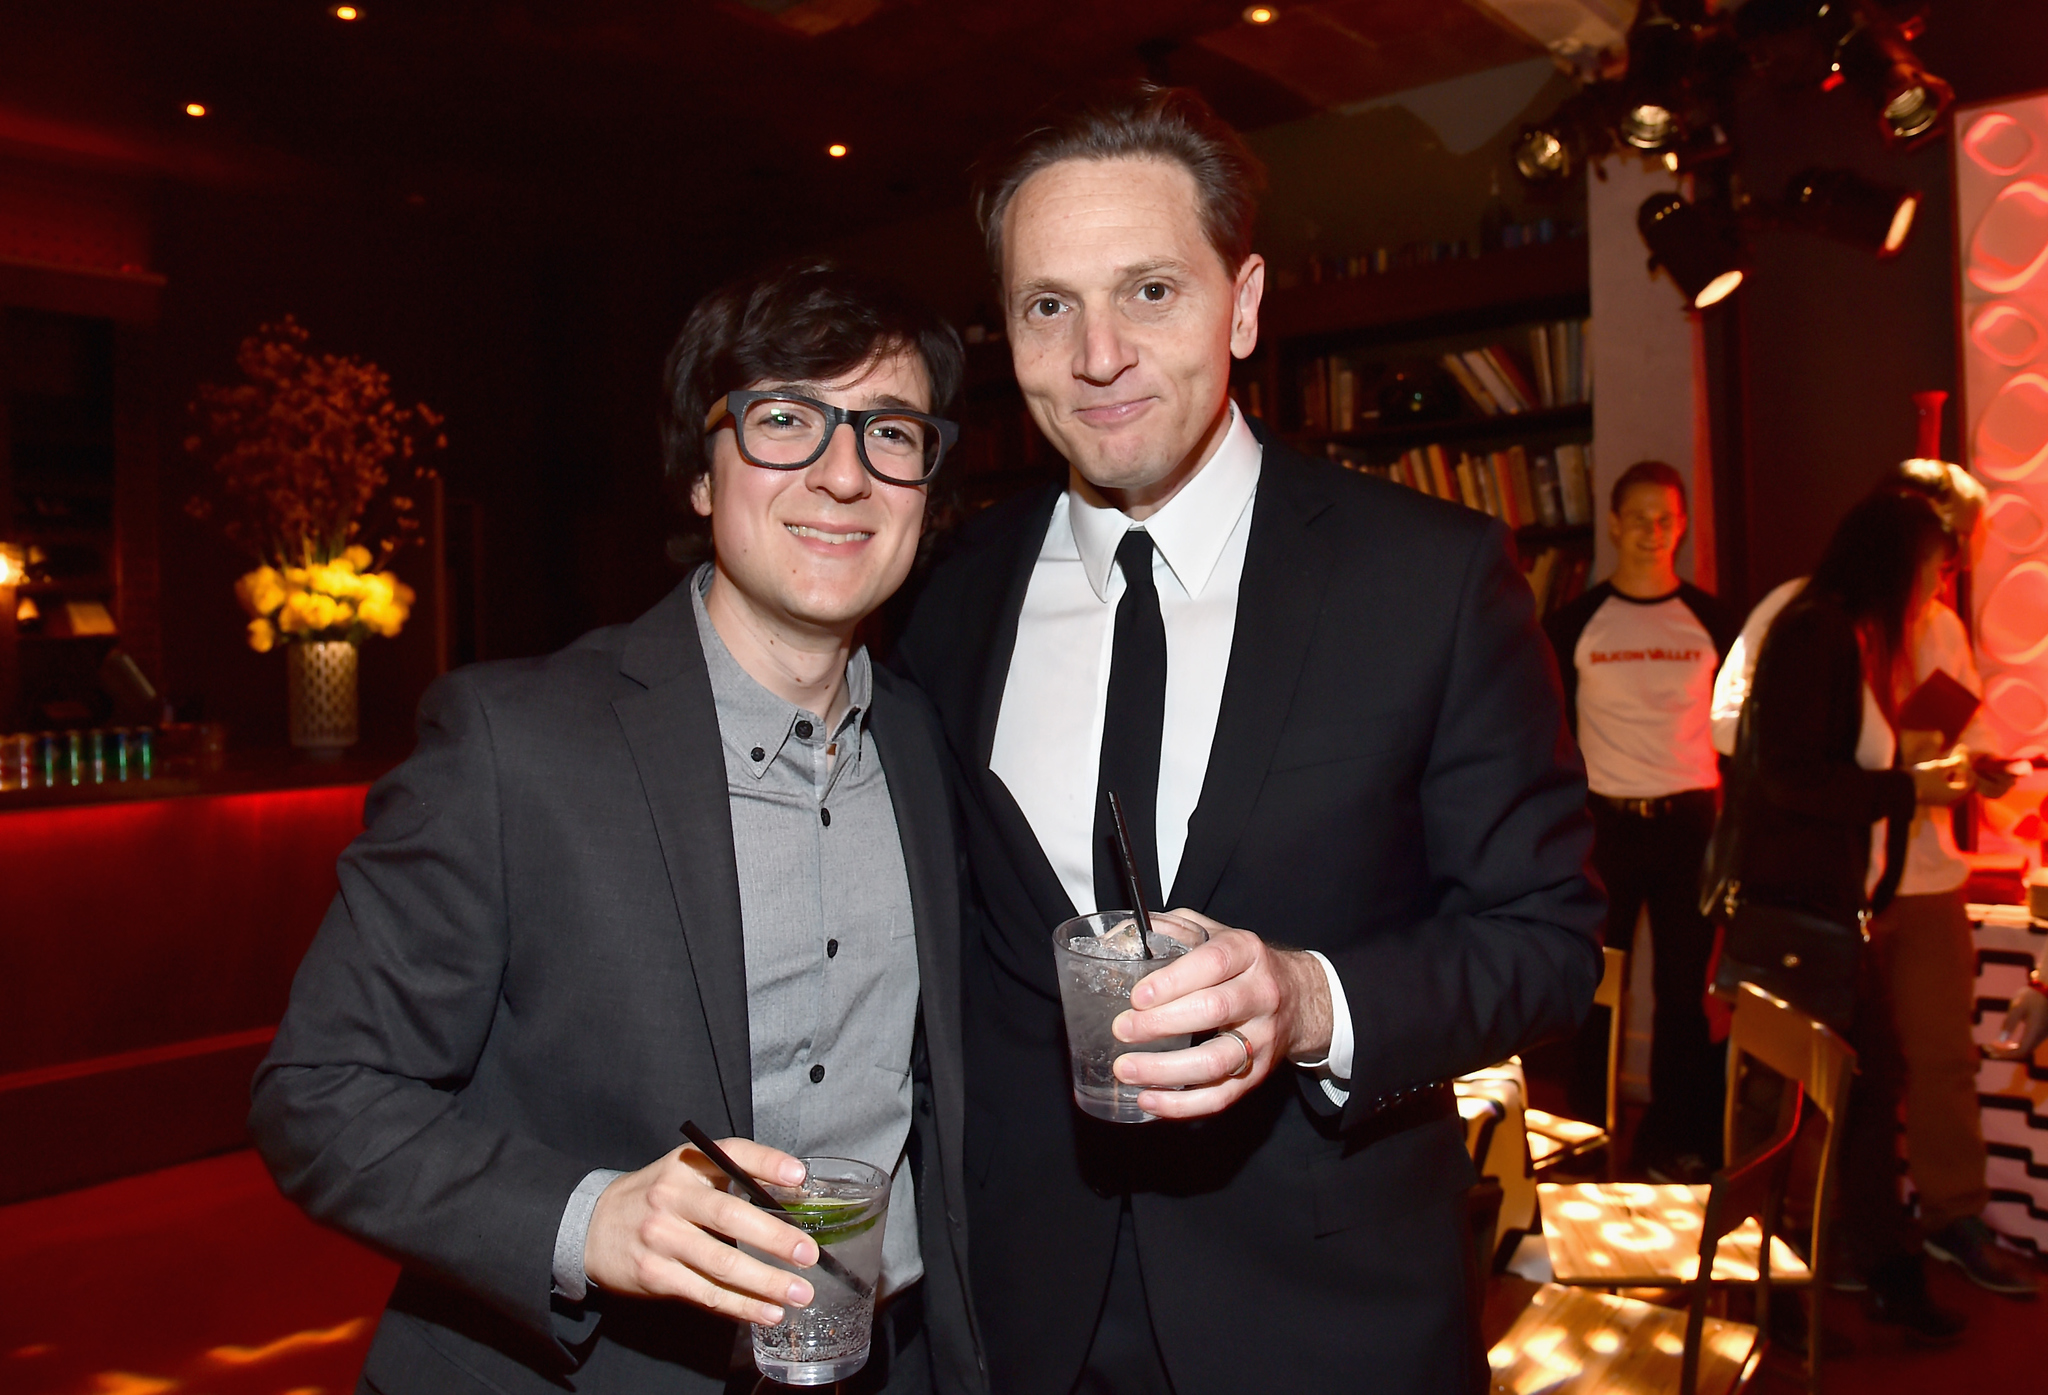 Matt Ross and Josh Brener at event of Silicon Valley (2014)